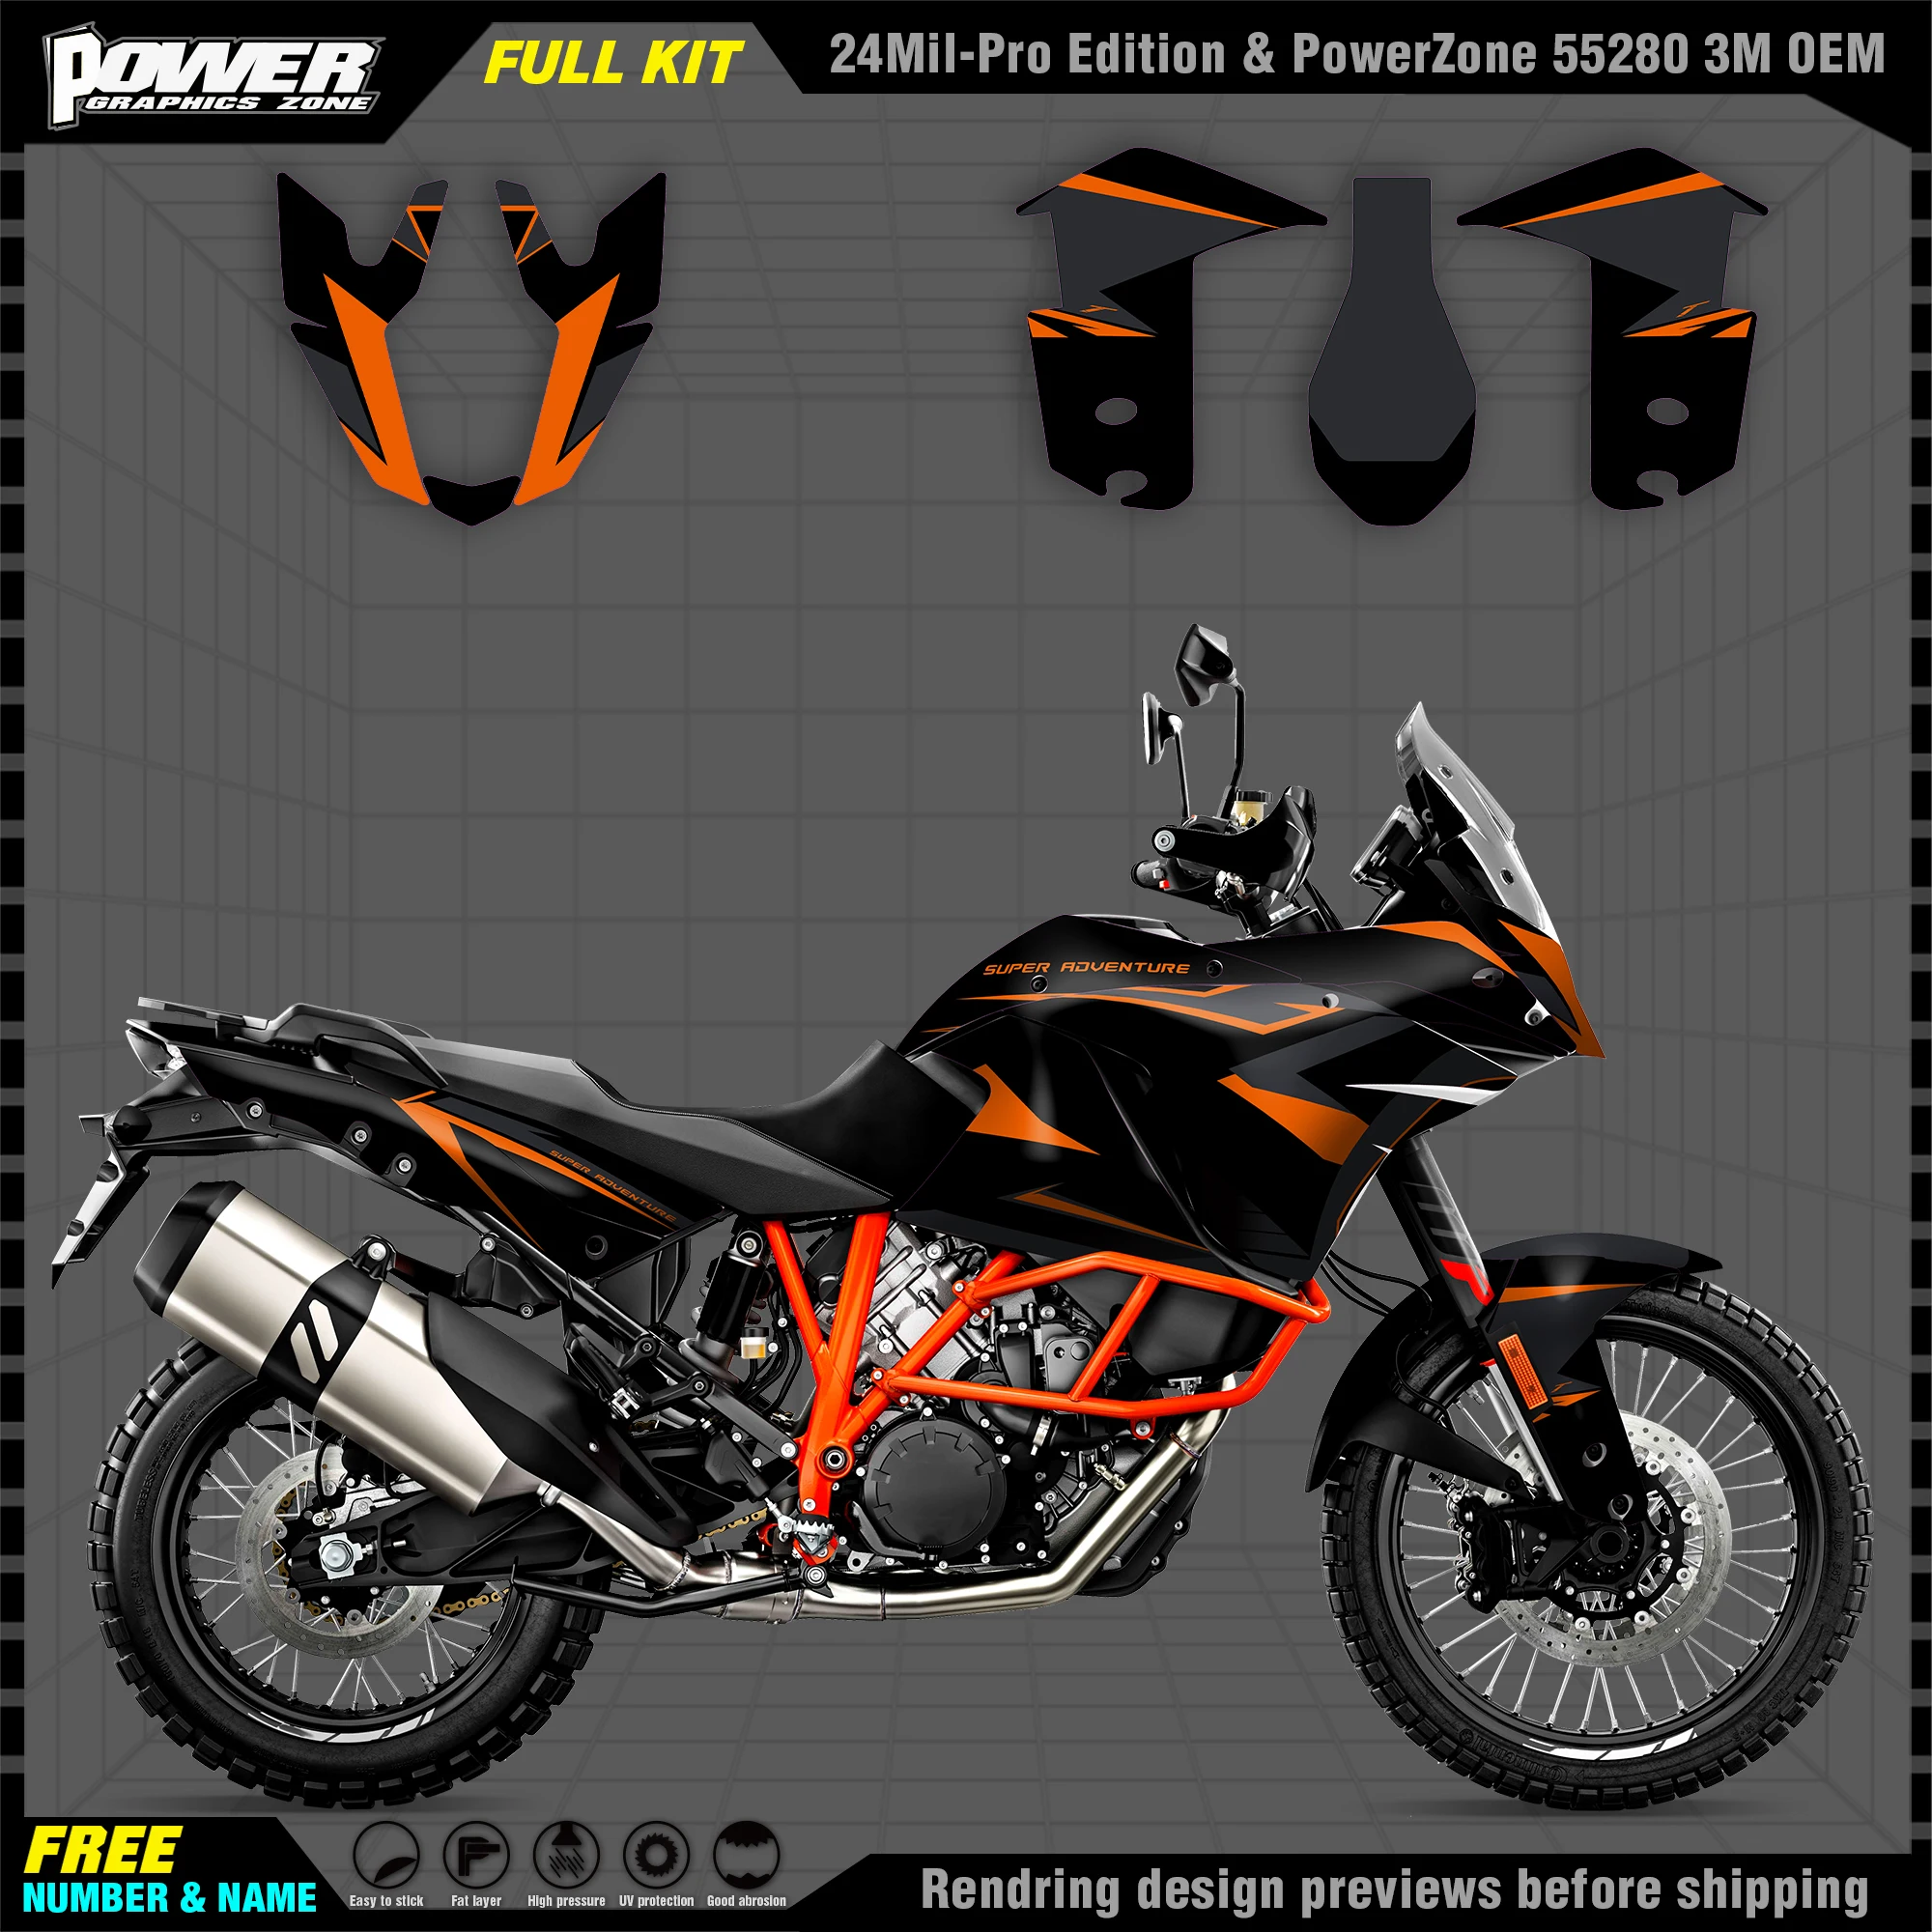 

PowerZone for Custom Team Graphics Backgrounds Decals Stickers Kit For KTM 03-16 ADV1050 1090 1190 RS Motorcycle 007